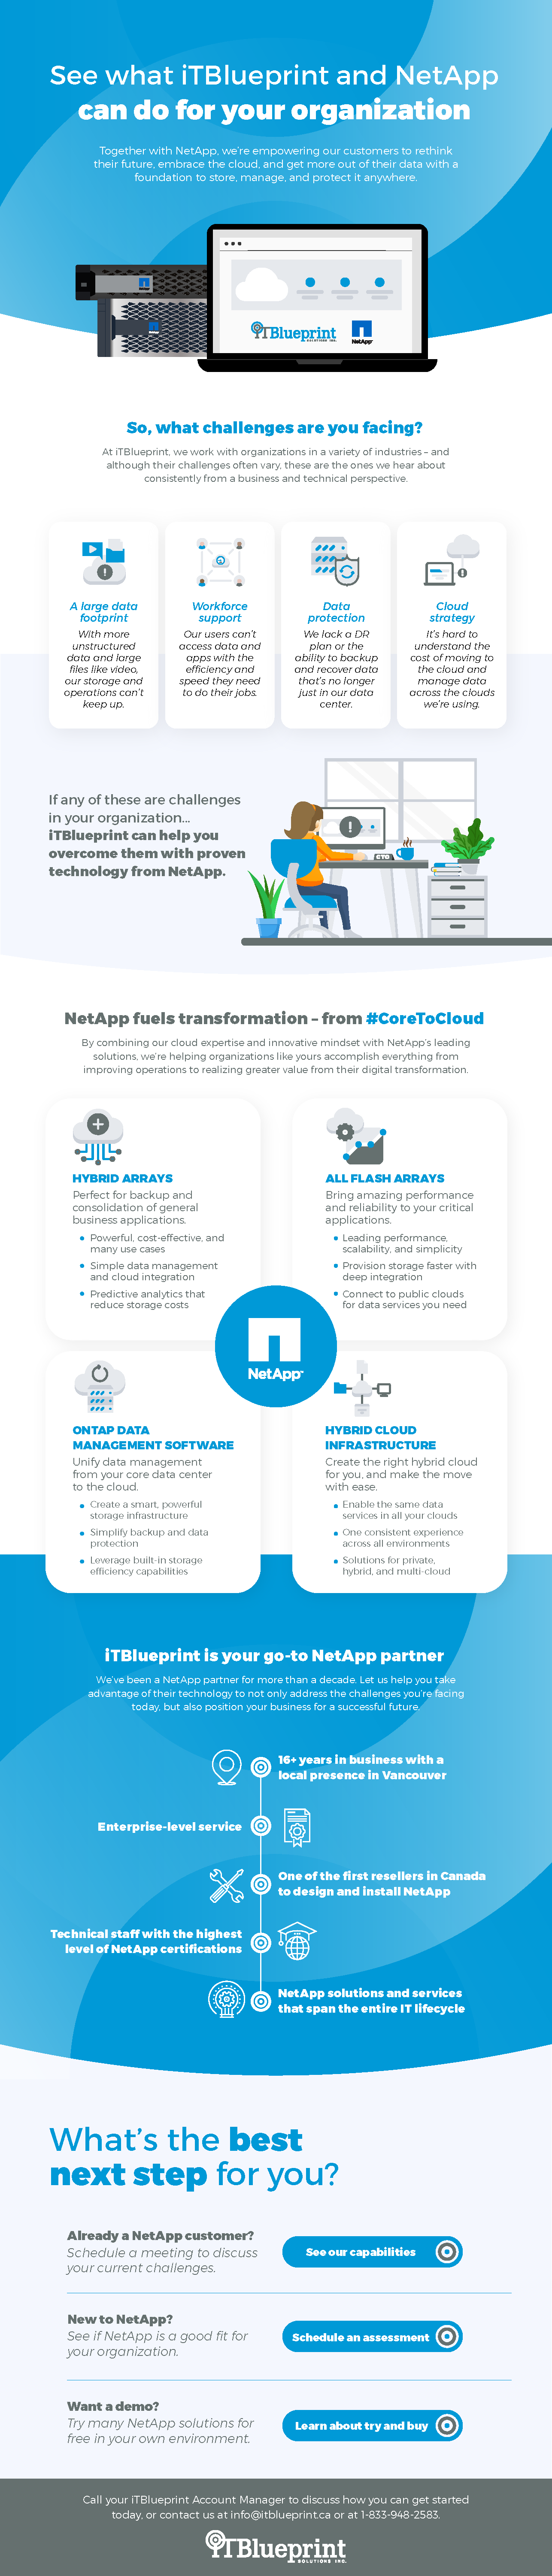 Long scrolling infographic primarily blue and white on the topic of NetApp for ITBlueprint using flat graphics